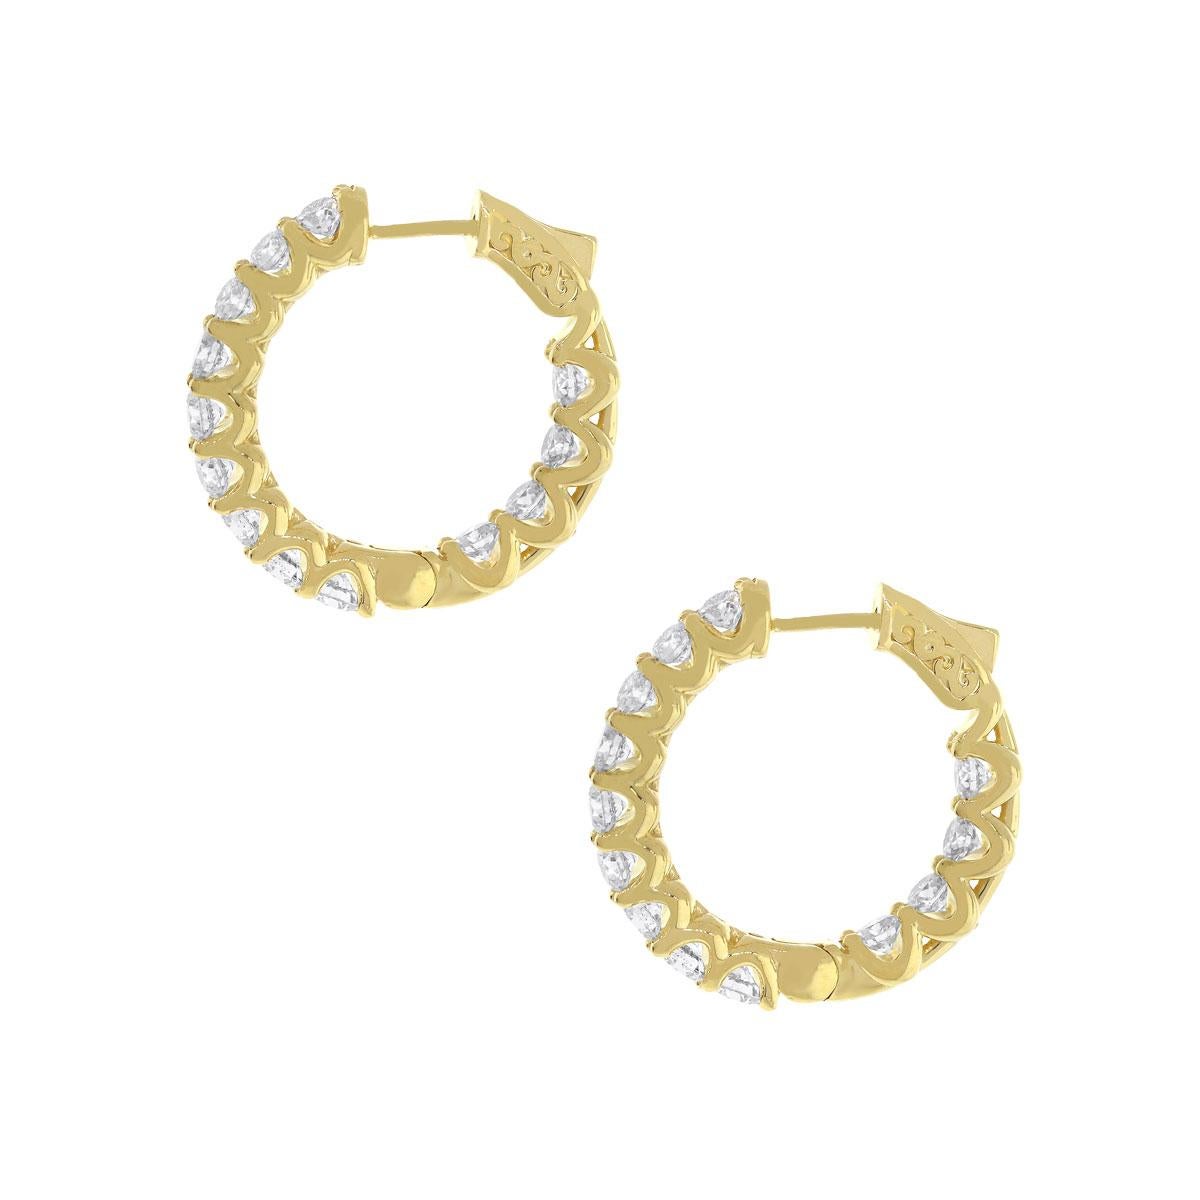 Material: 14k Yellow gold
Style: Diamond inside out hoop earrings
Diamond Details: 26 Stones, approximately 4.26ctw of round brilliant diamonds. Diamonds are G/H in color and VS in clarity.
Earring Measurements: 1″ x 0.20″ x 1″
Total Weight: 12.4g